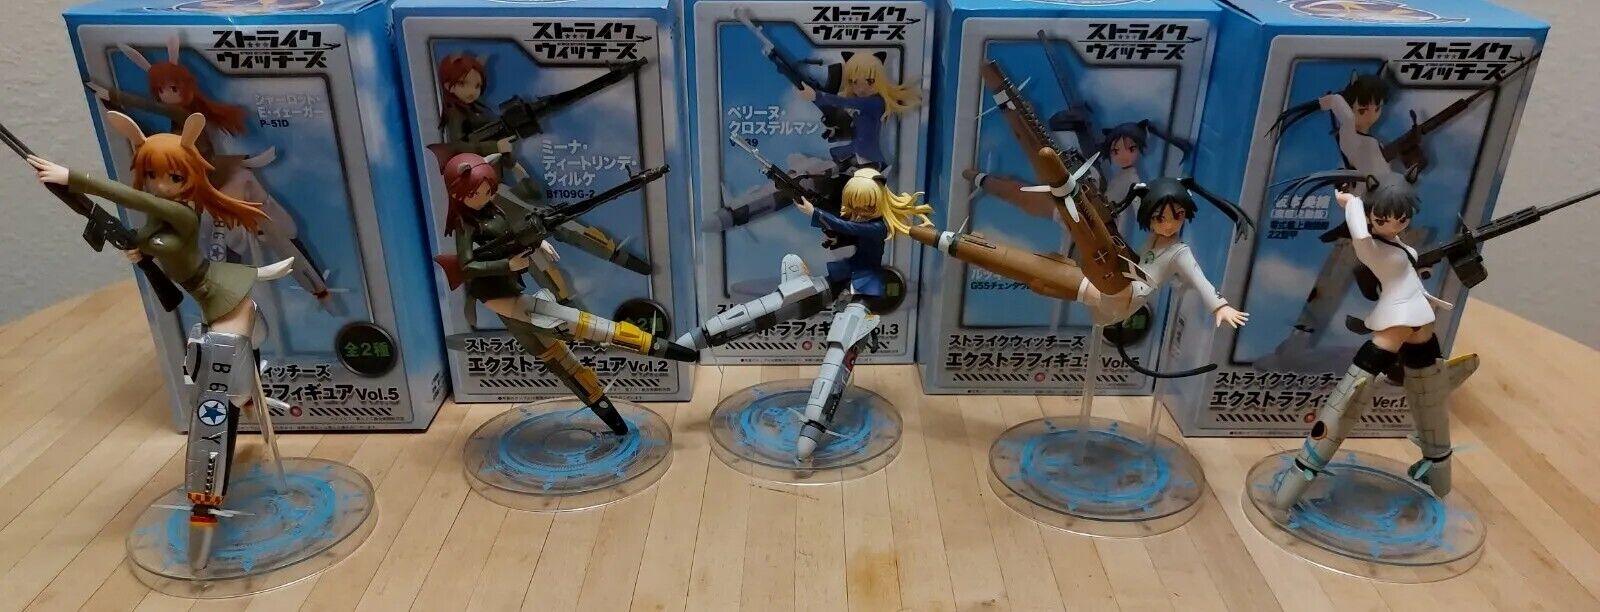 Strike Witches SEGA Figurines - 2011 Lot Of 5 Pre Owned (Very Good Condition) 